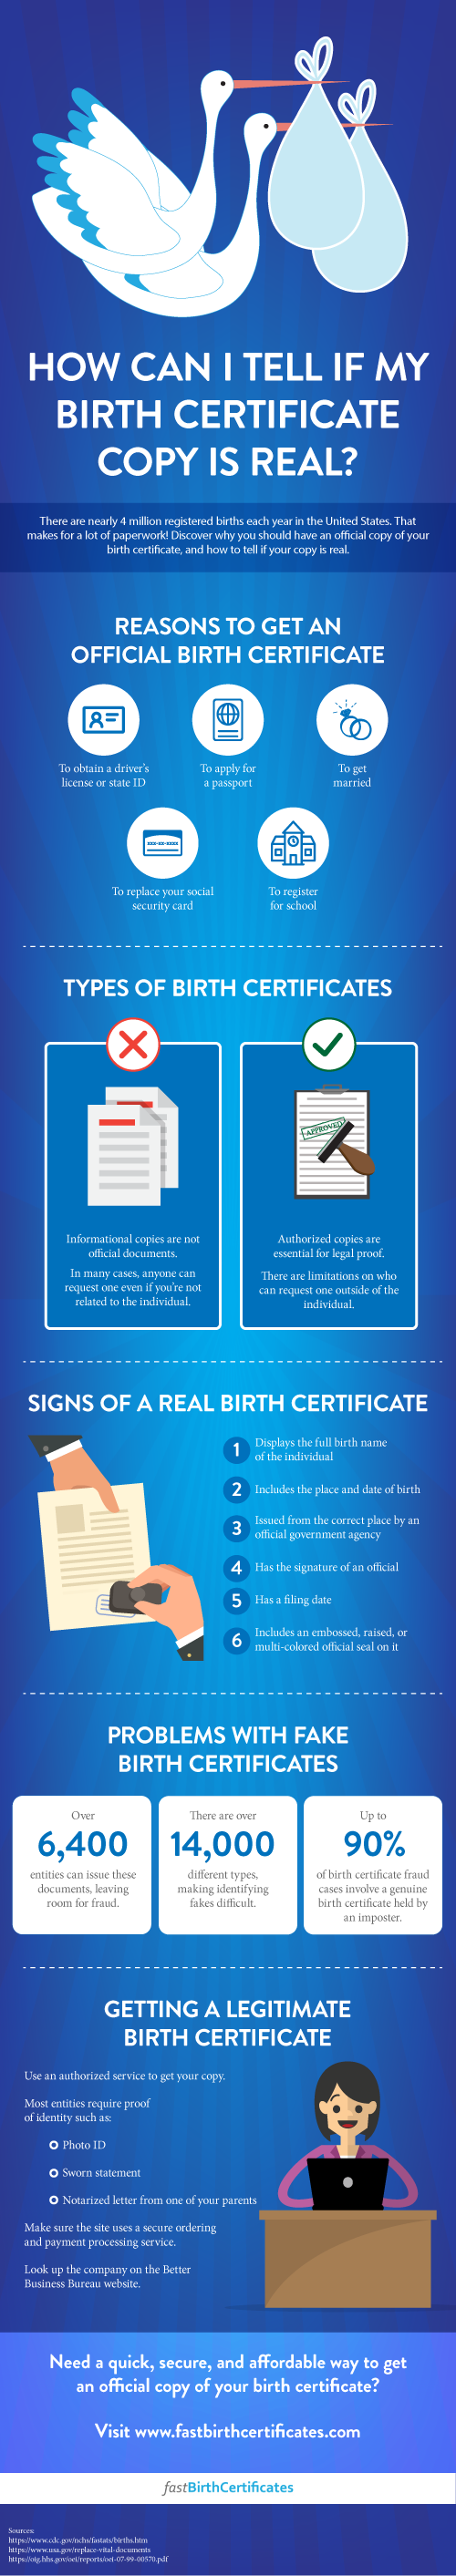 infographic - how can it ell if my birth certificate copy is real